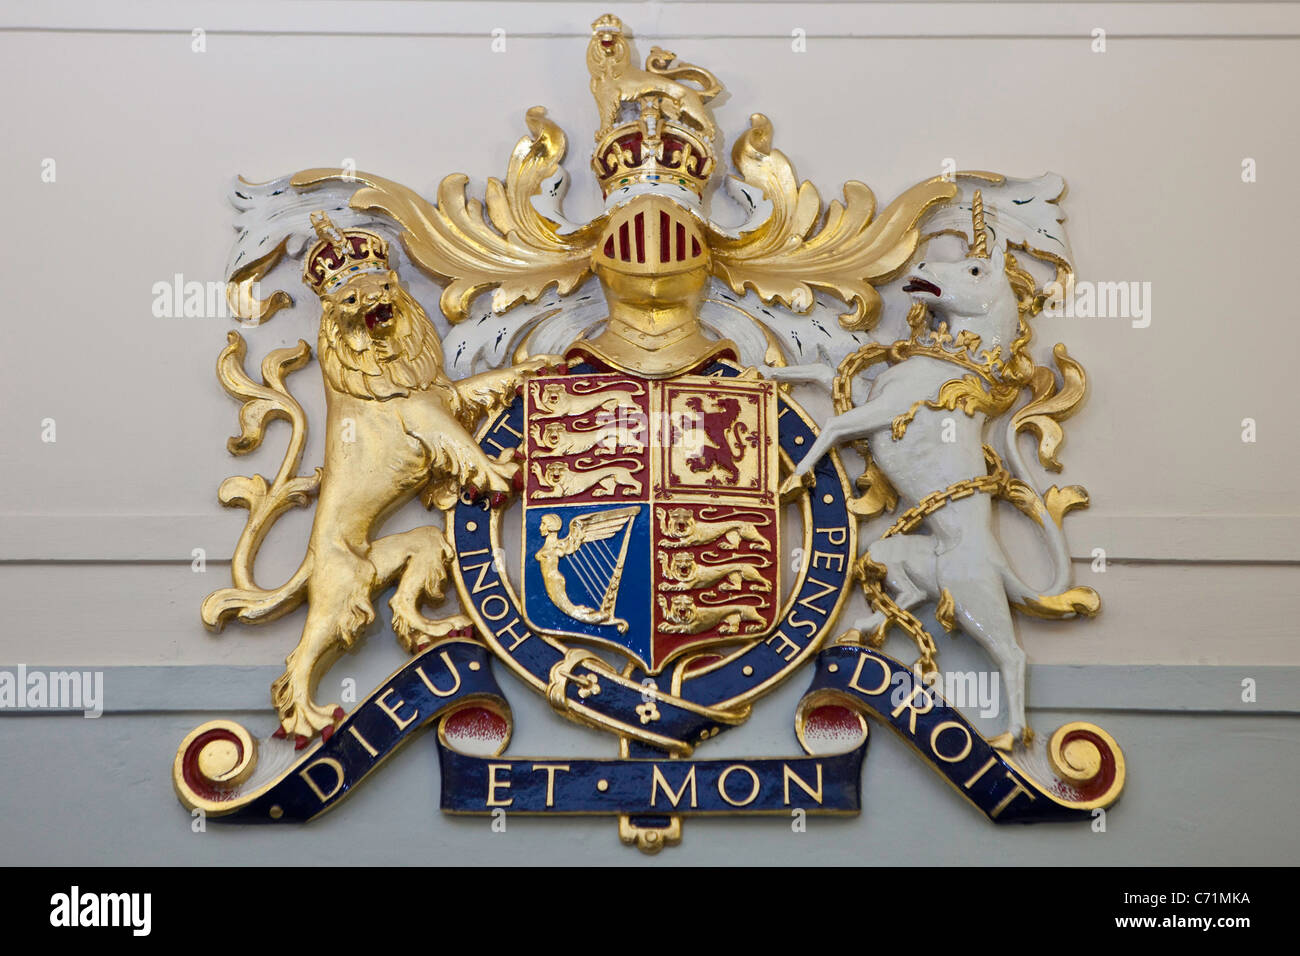 The Royal Coat of Arms that appears in all court rooms in England. The official coat of arms of the British monarch. Stock Photo